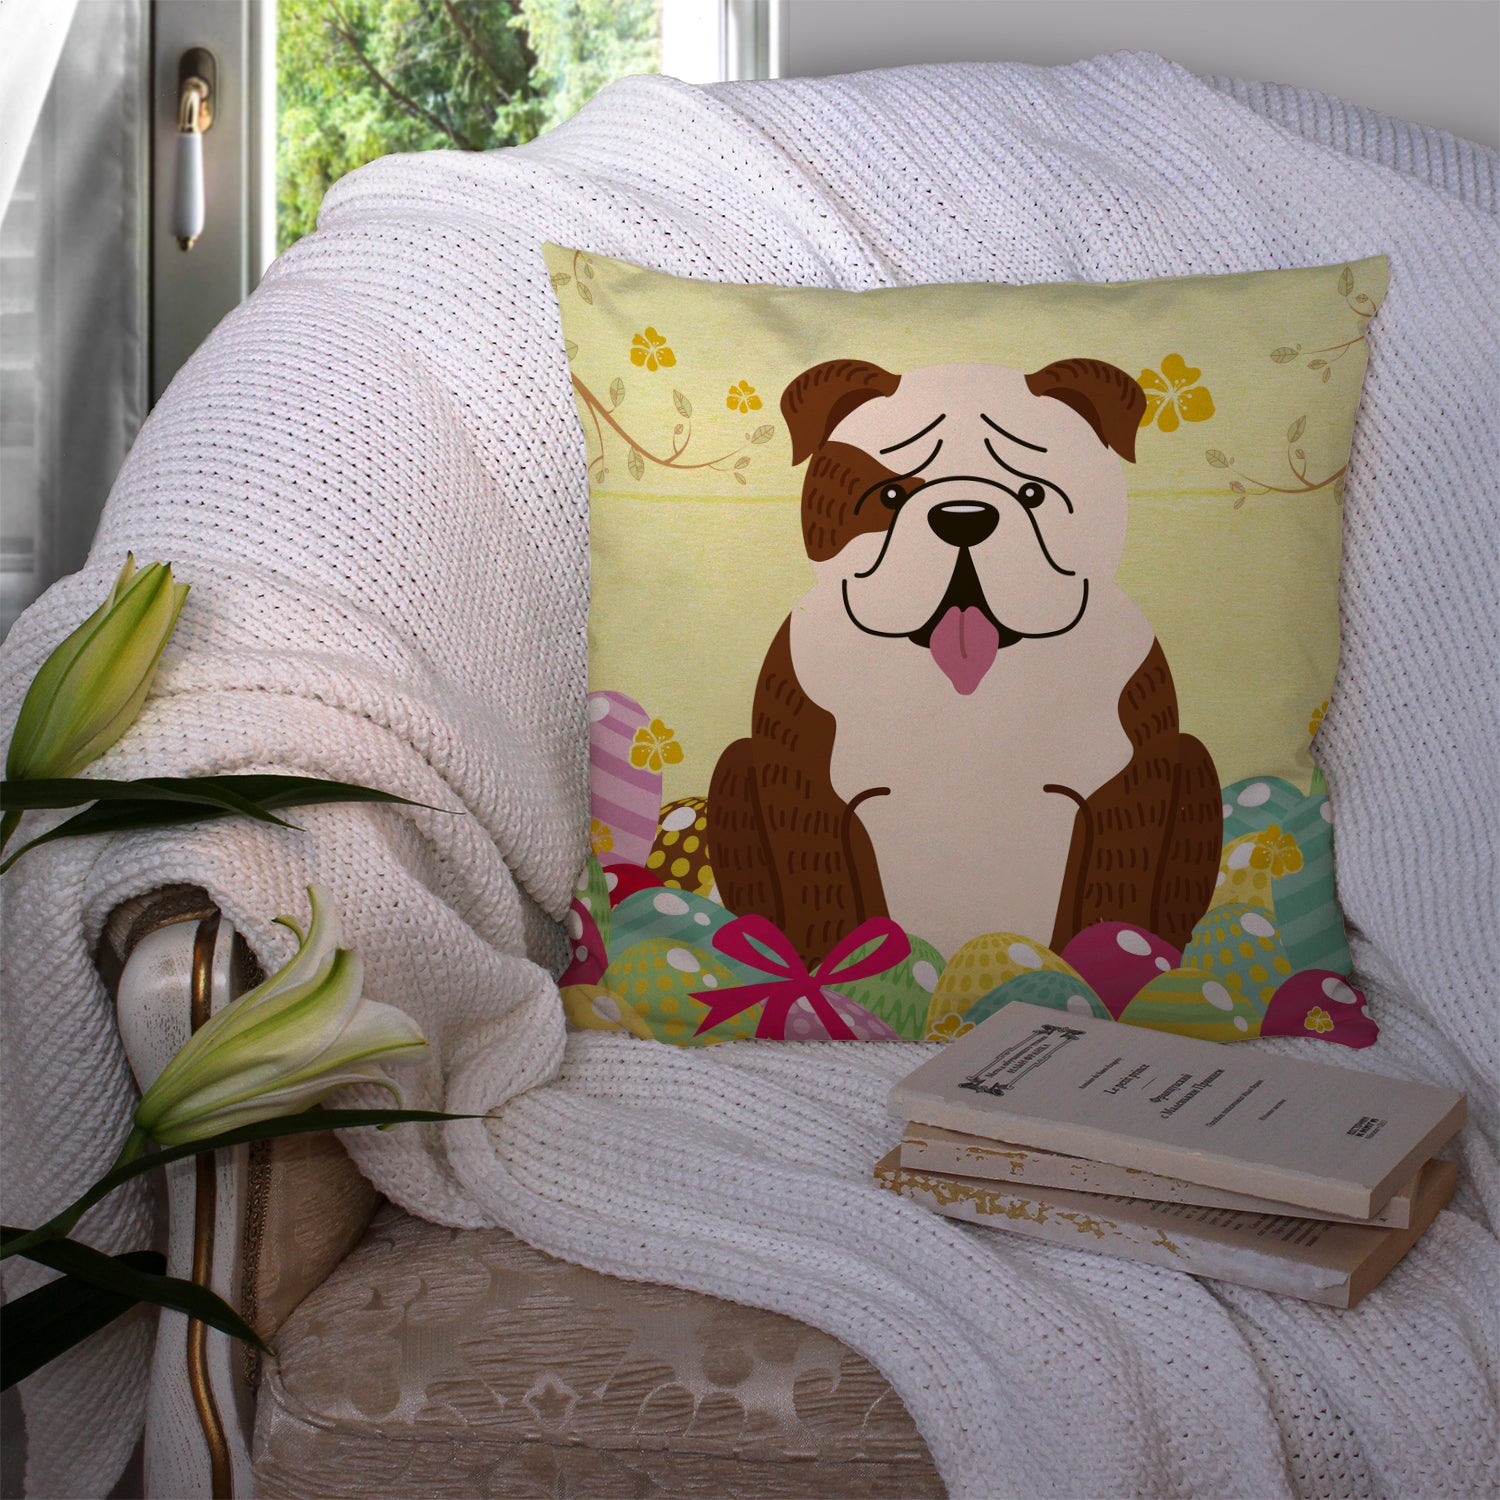 Easter Eggs English Bulldog Brindle White Fabric Decorative Pillow BB6121PW1414 - the-store.com